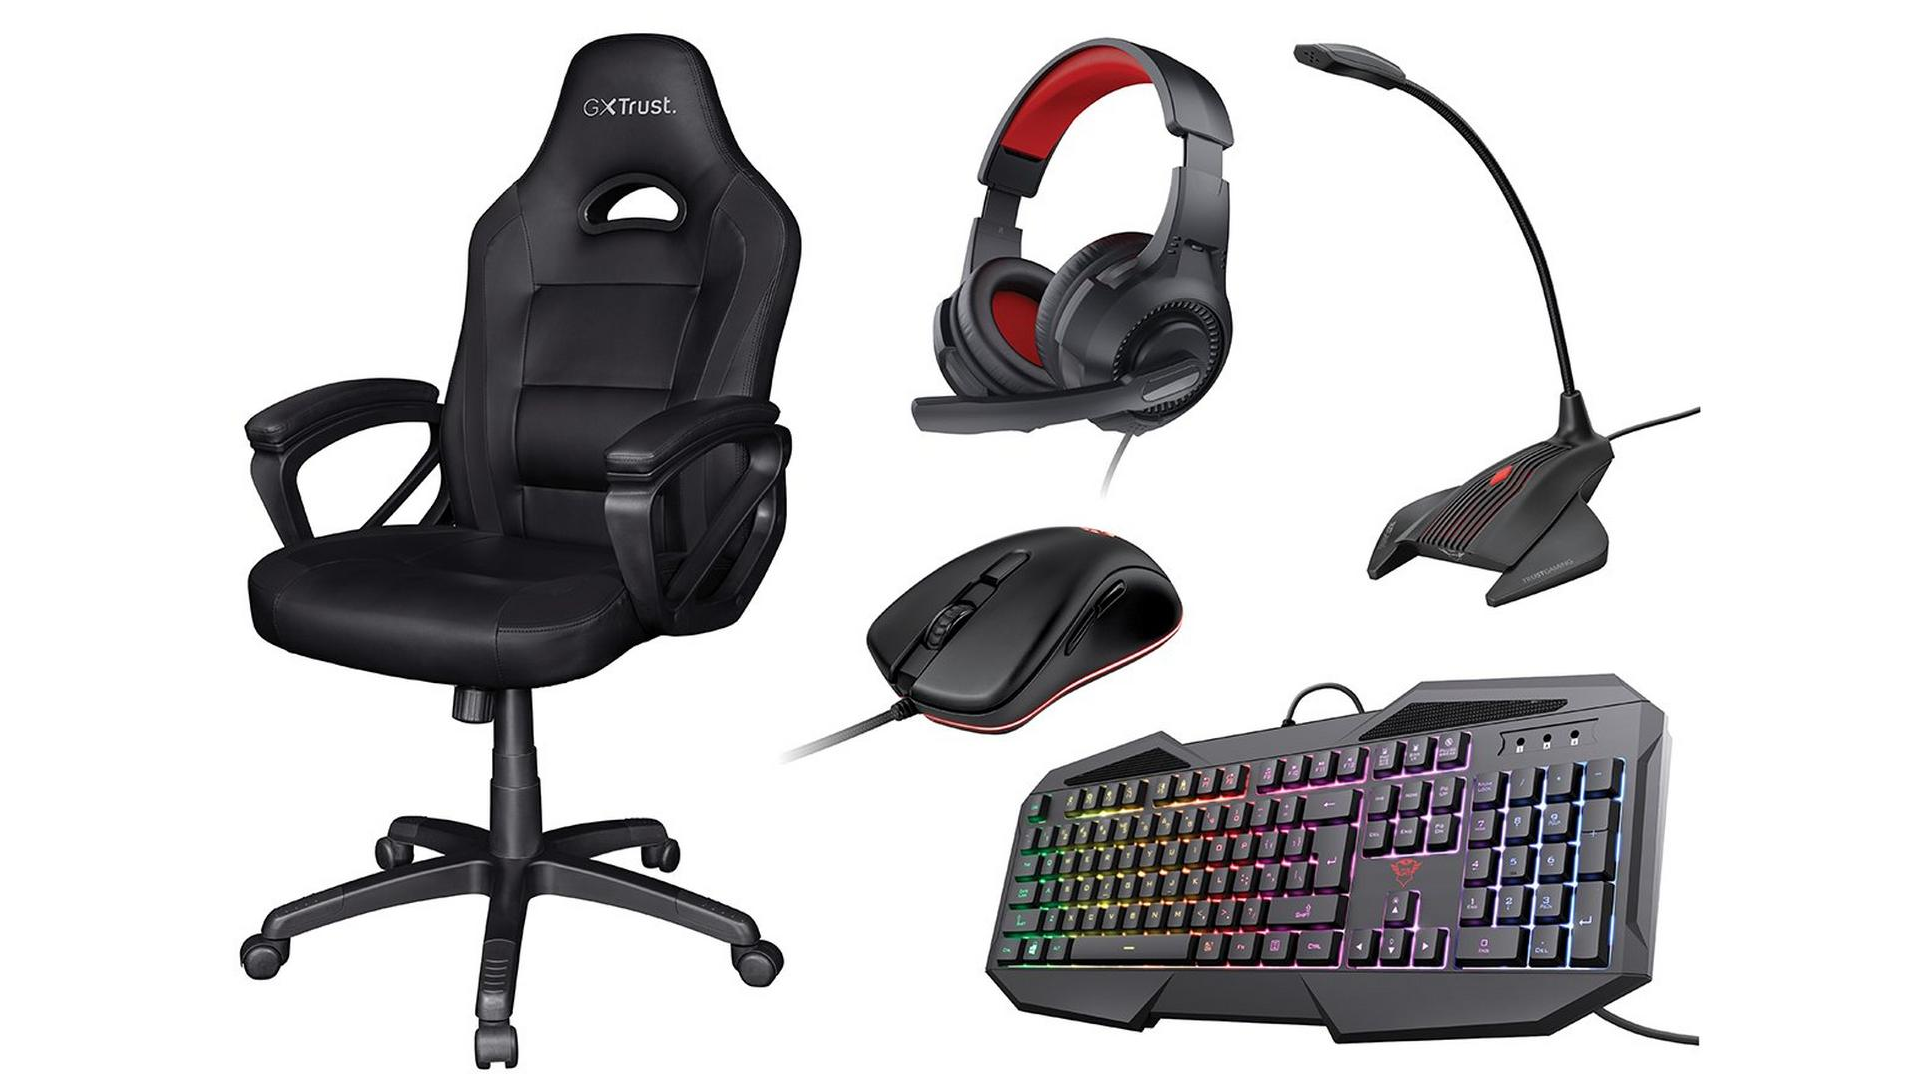 Image for Upgrade your gaming setup with this 5-in-1 bundle of accessories for just £135